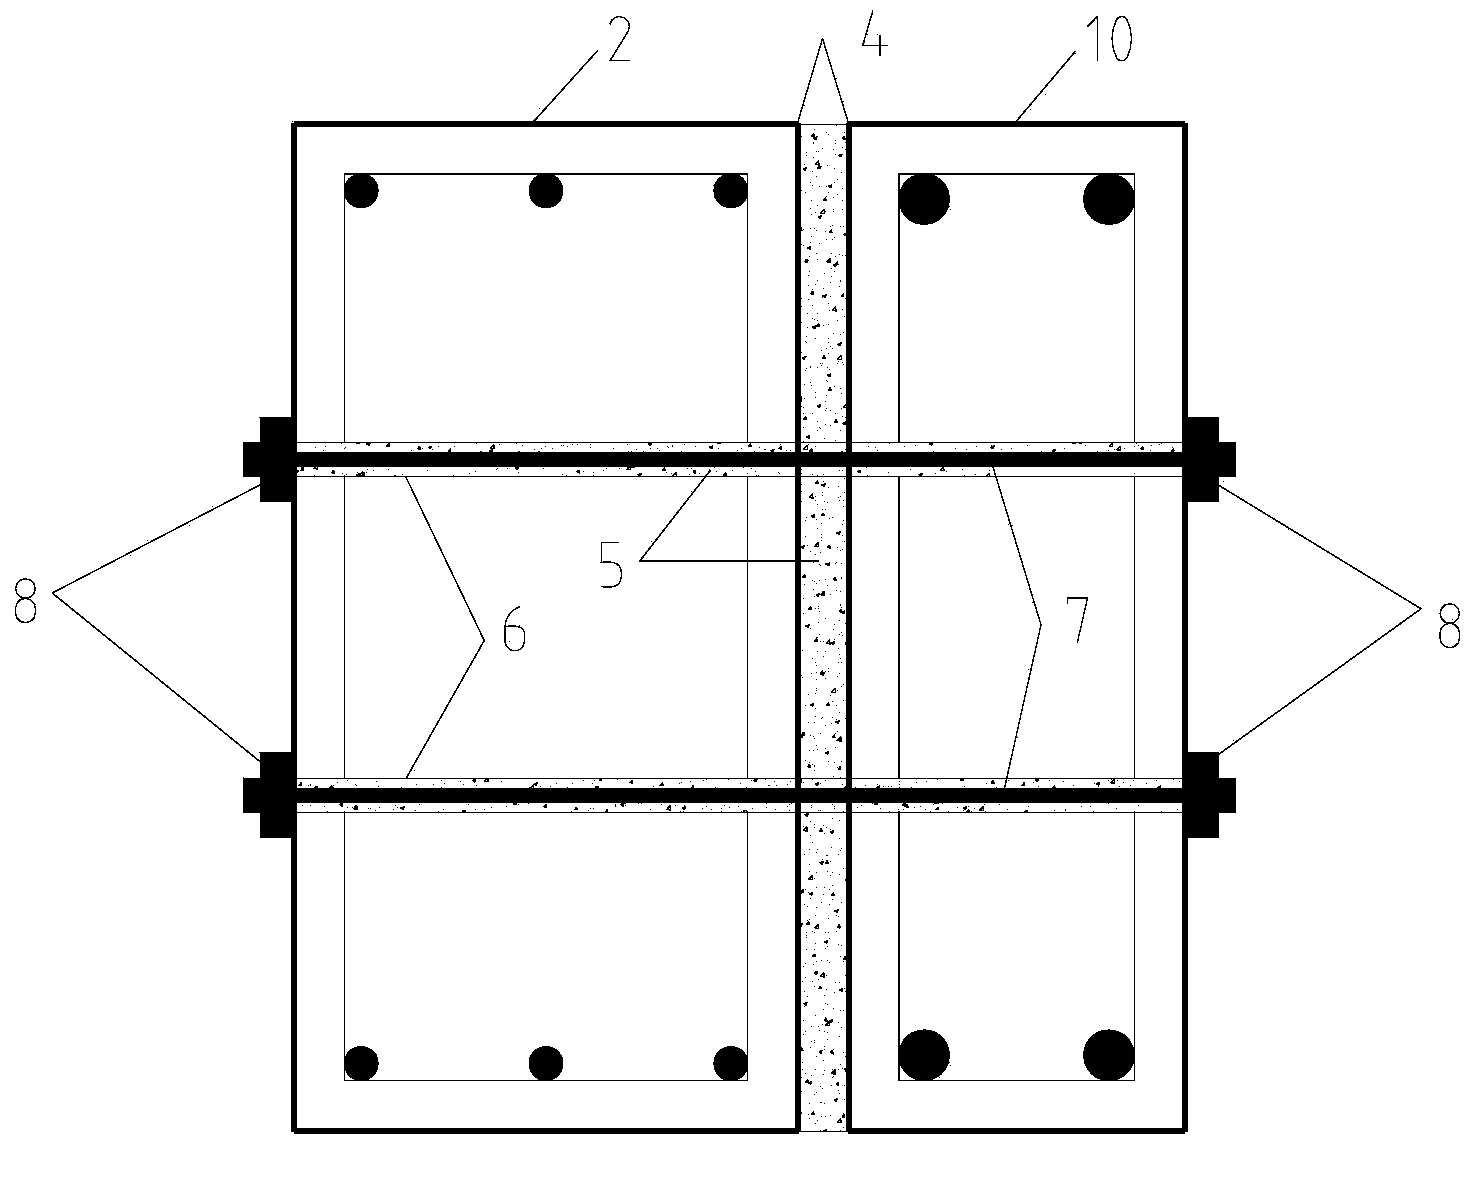 Method for using prefabricated reinforced concrete frame to reinforce existing structure through prestressing assembly